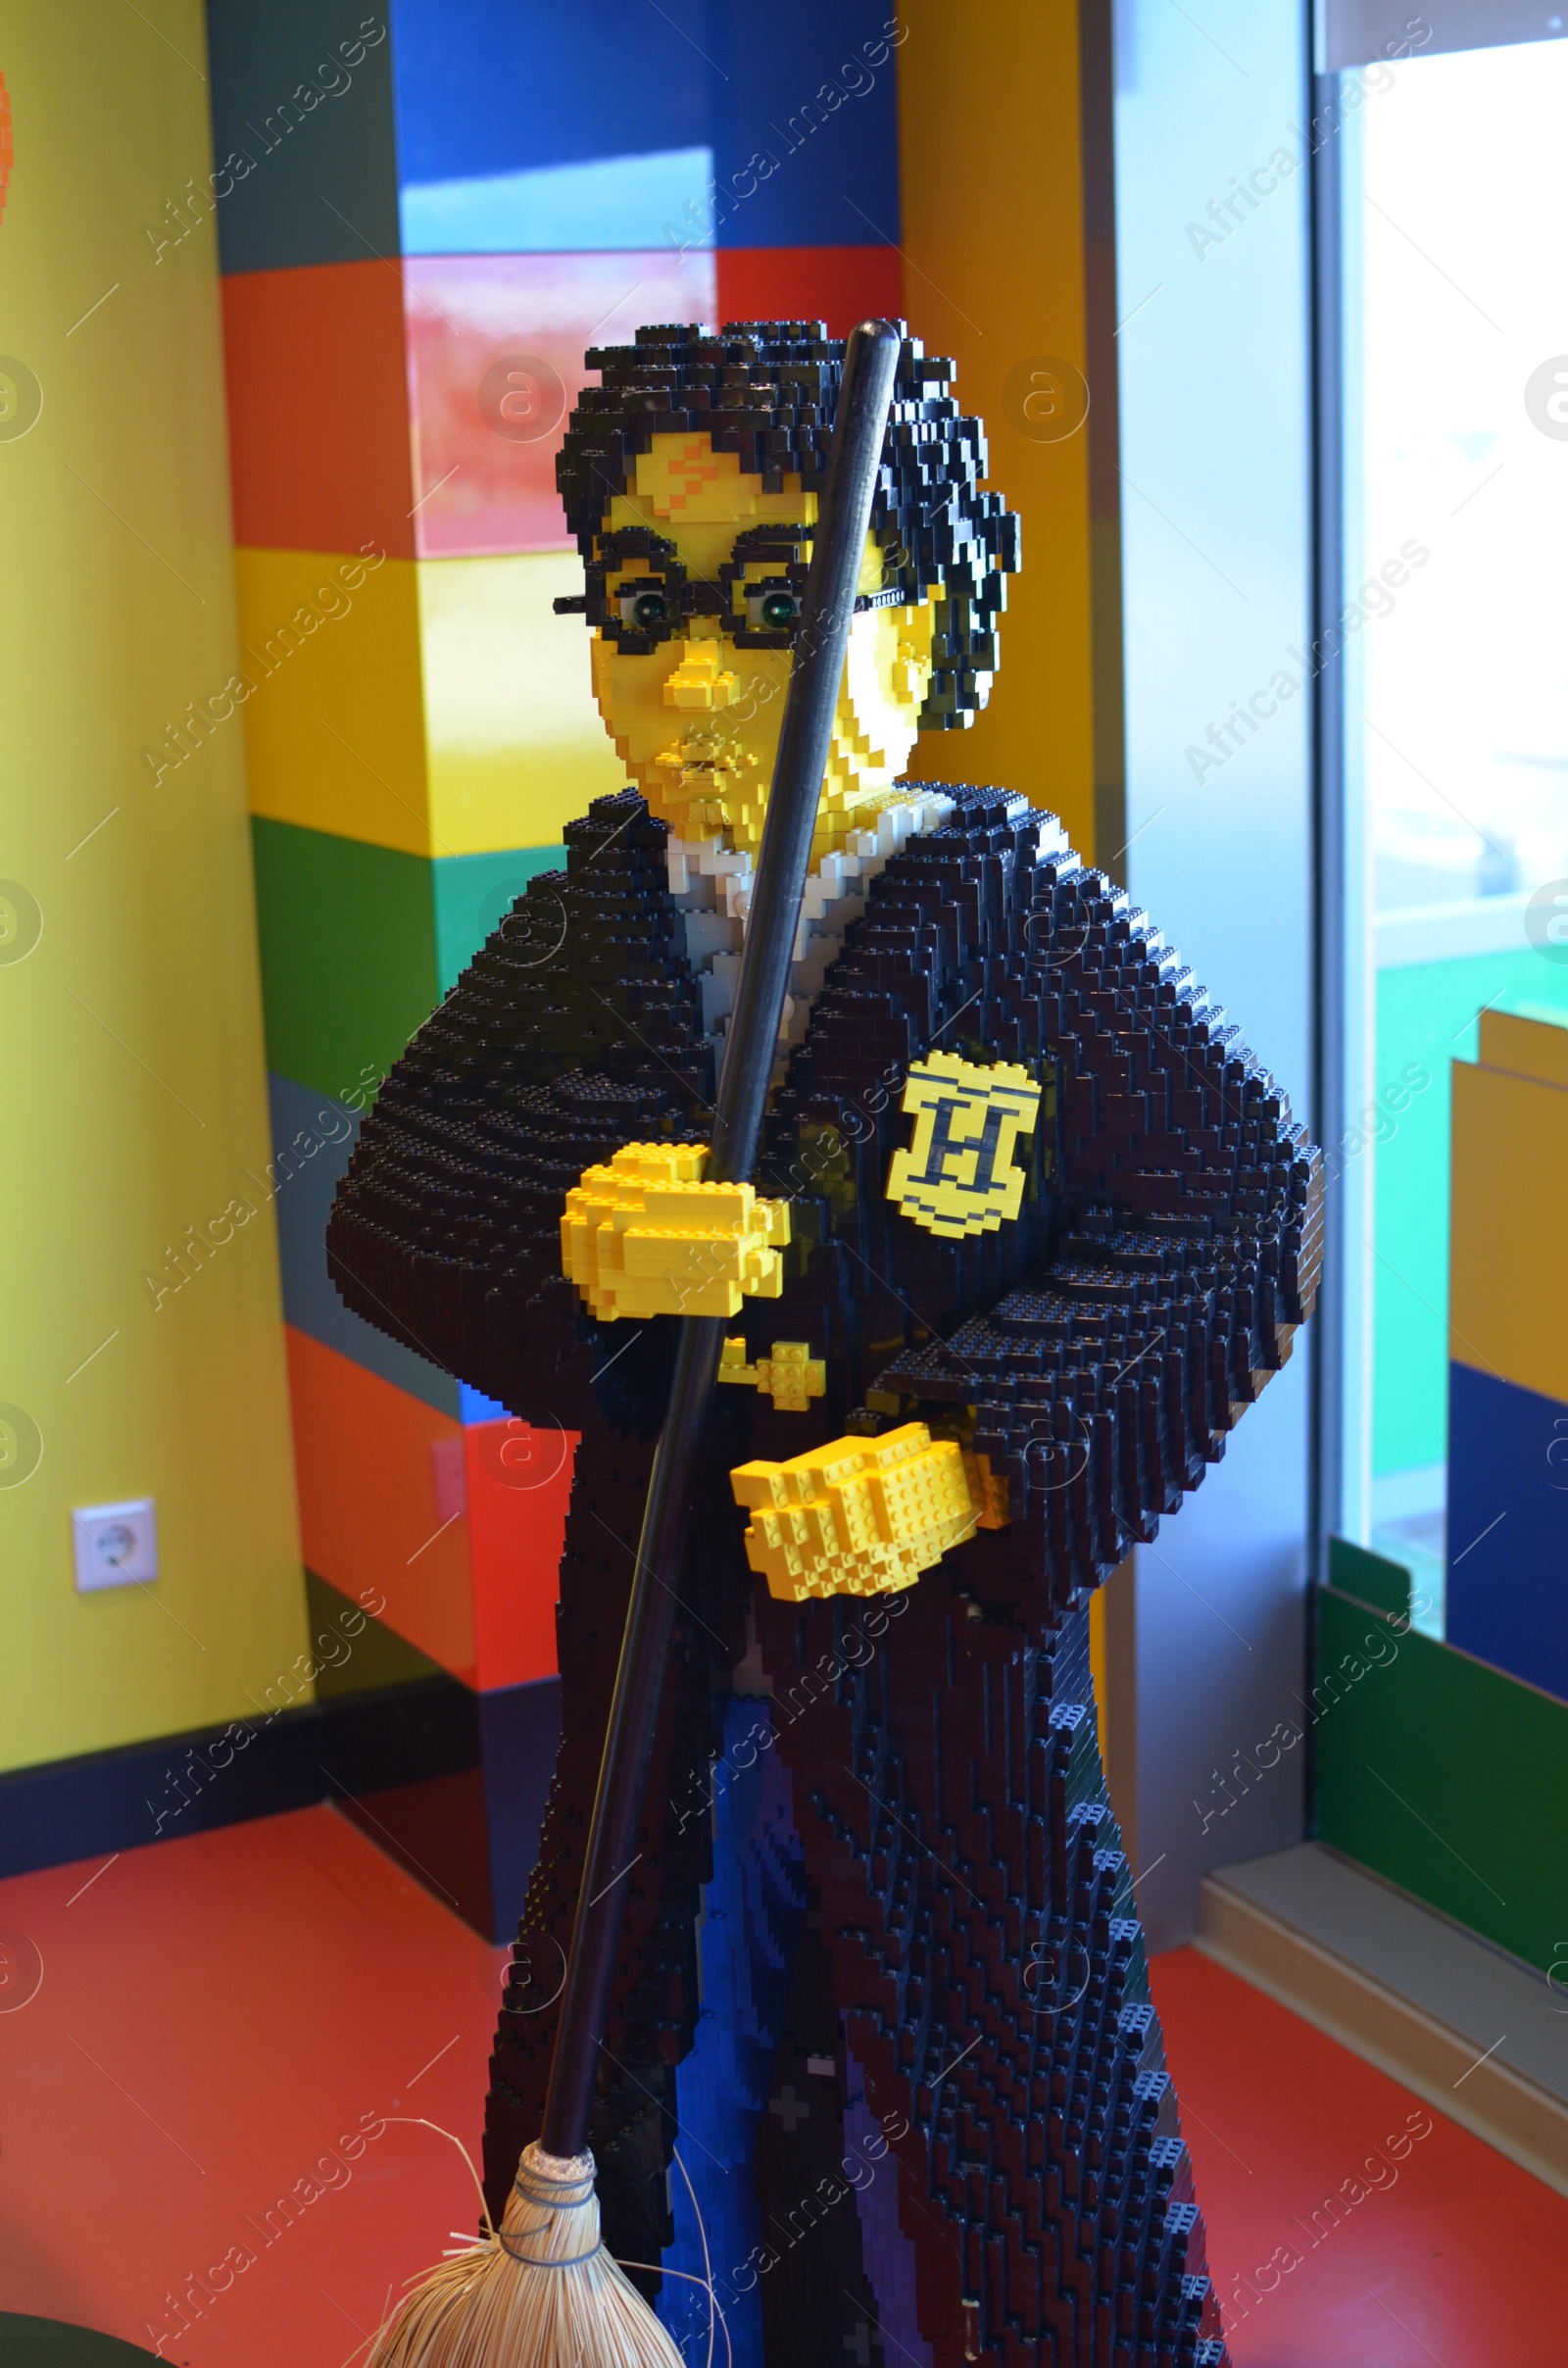 Photo of AMSTERDAM, NETHERLANDS - SEPTEMBER 10, 2022: Harry Potter figure made with colorful Lego constructor indoors